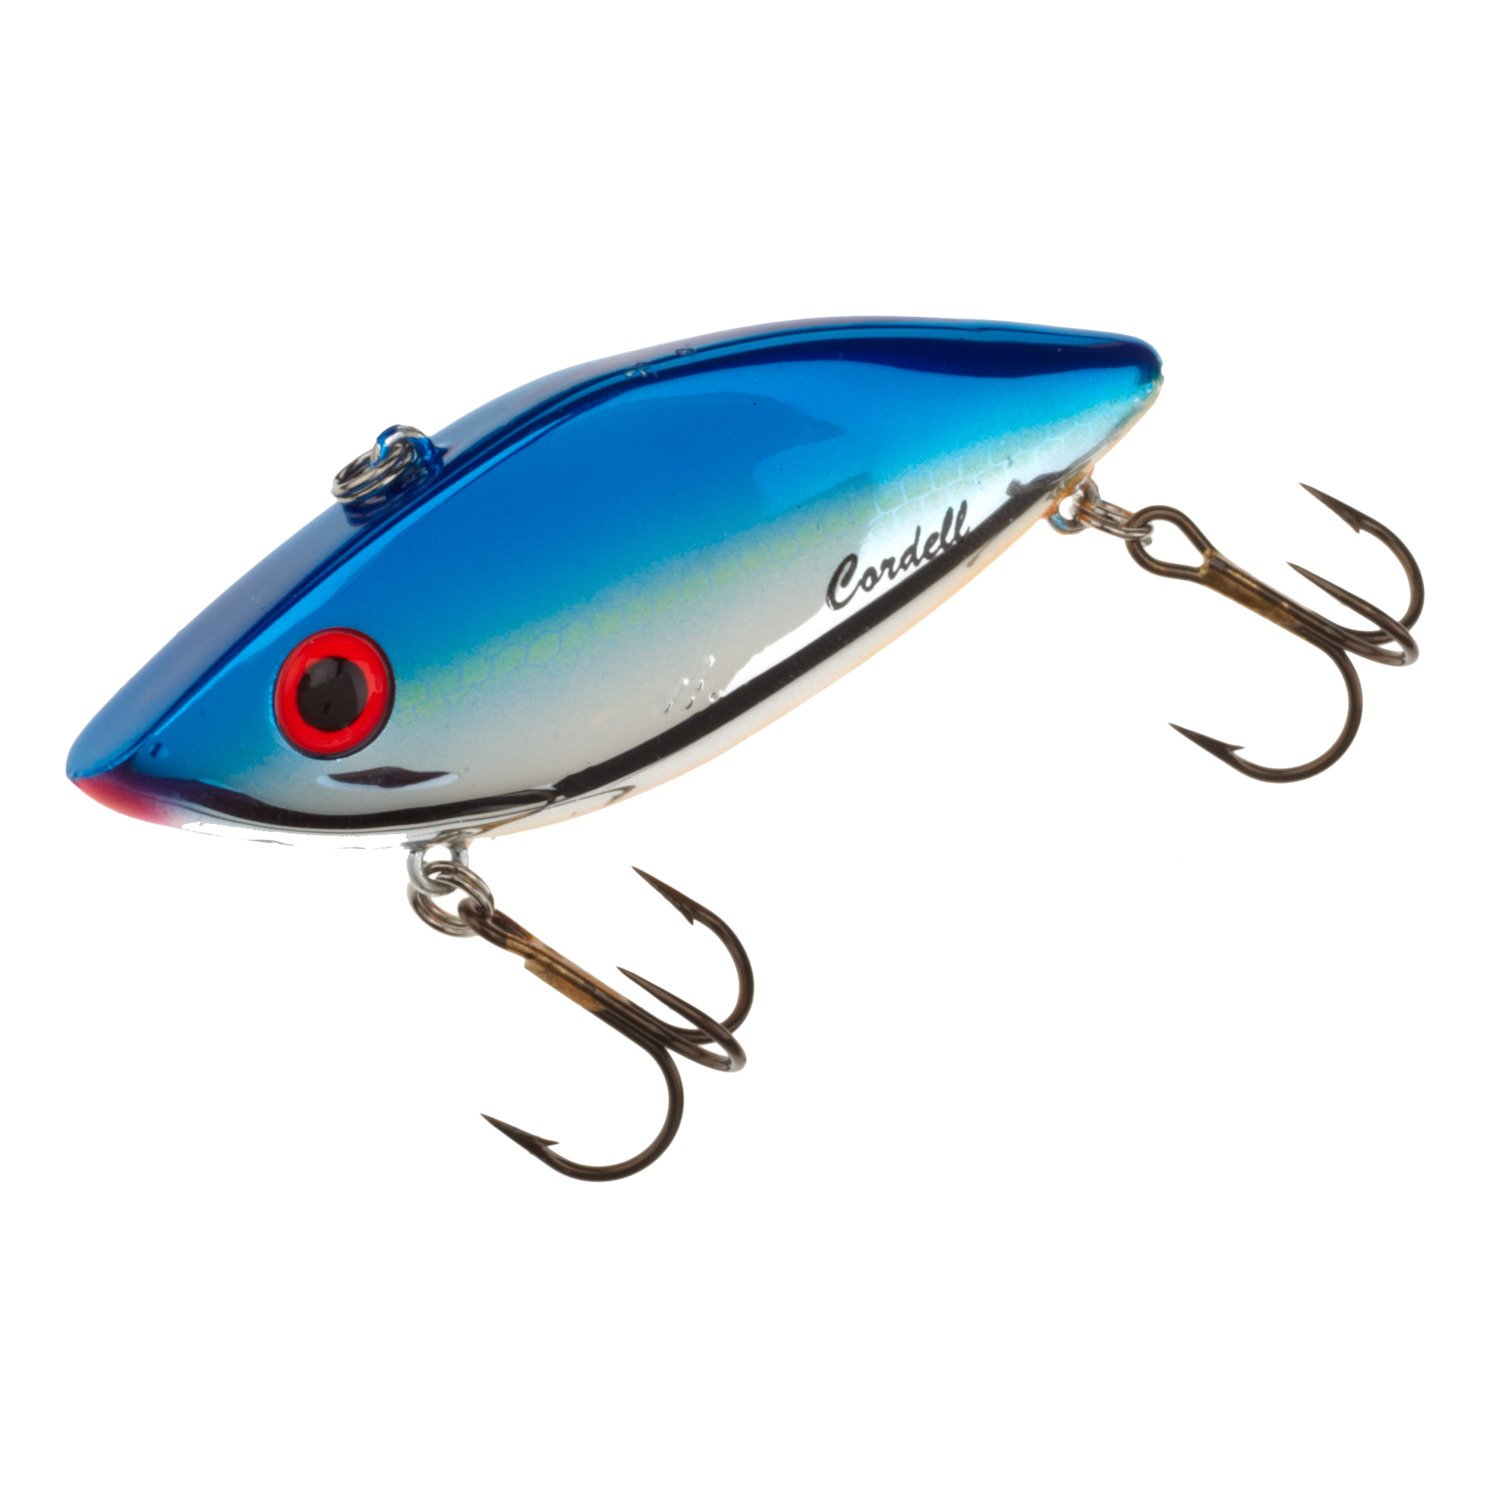 Cotton Cordell Suspending Ripplin' Redfin Lures - All colors available